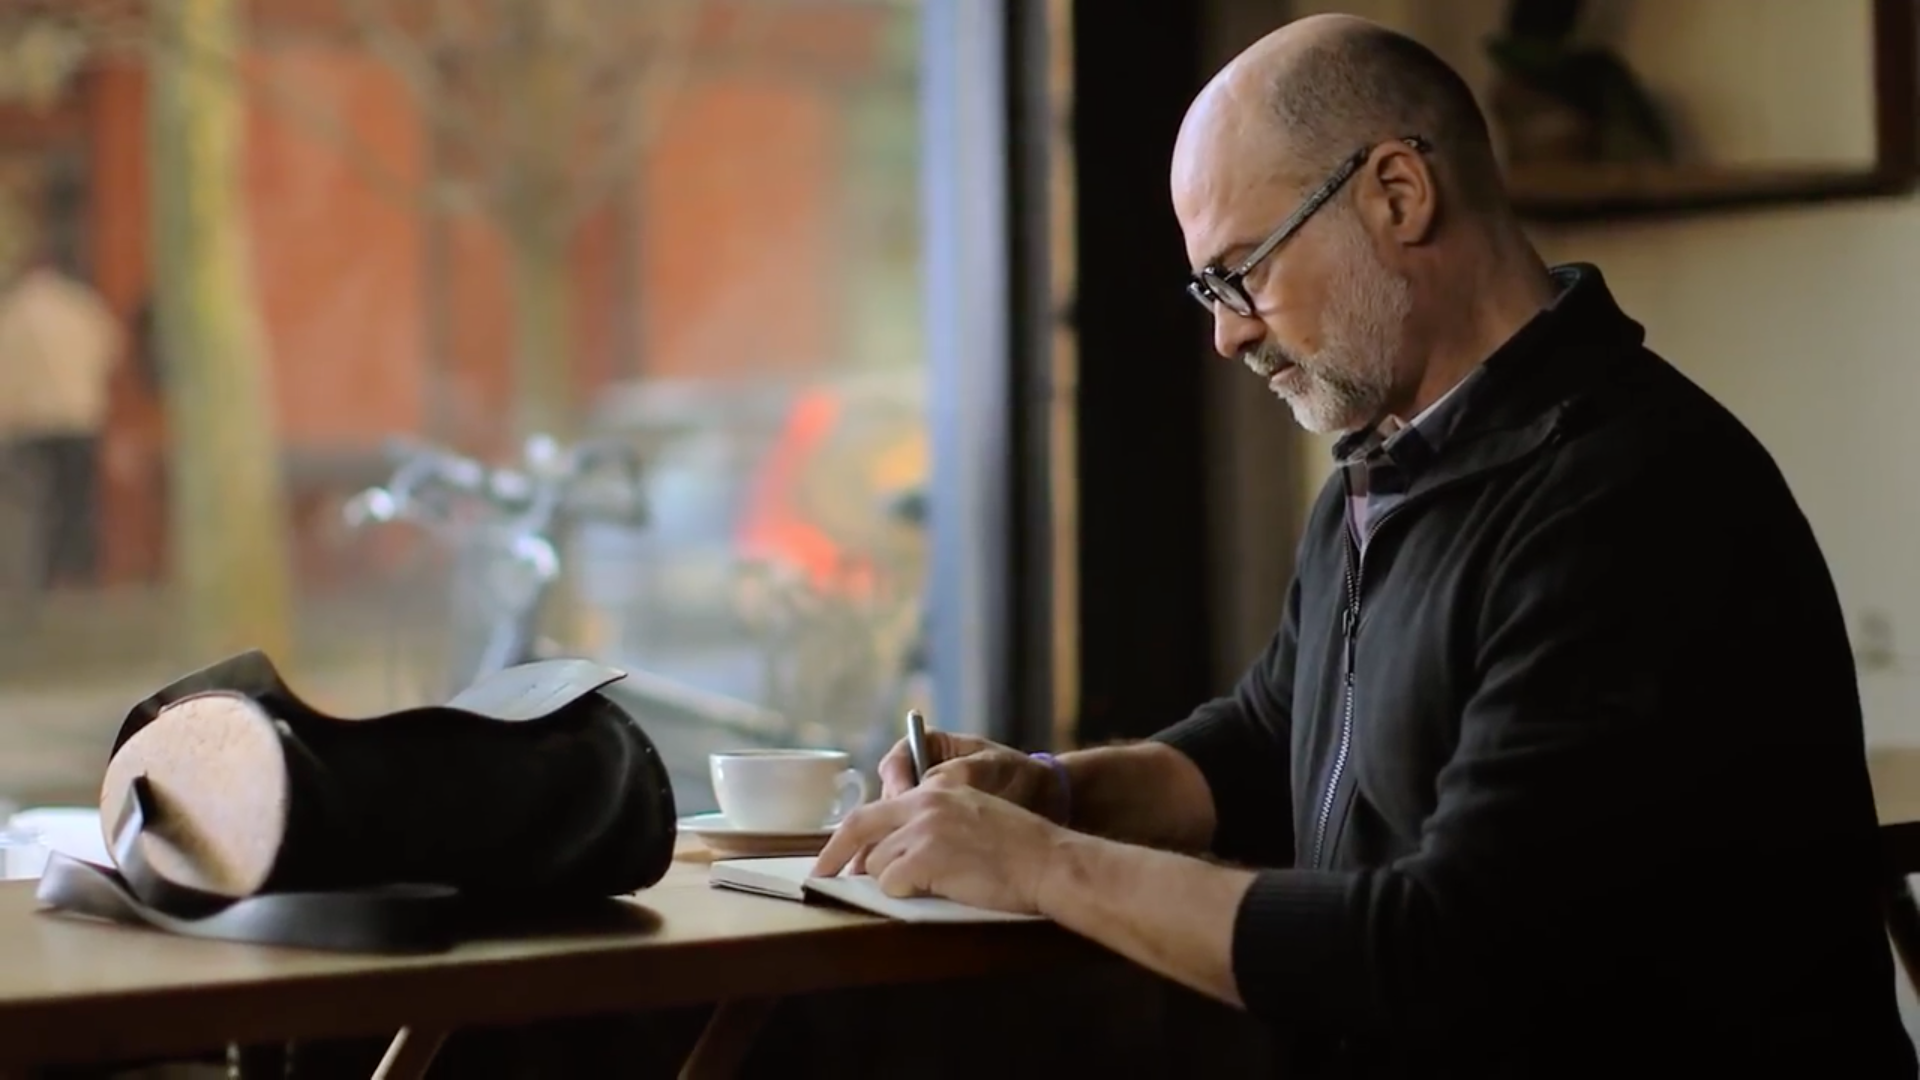 Bald man with glasses writing in a notebook at a cafe table, hat beside him, window view.